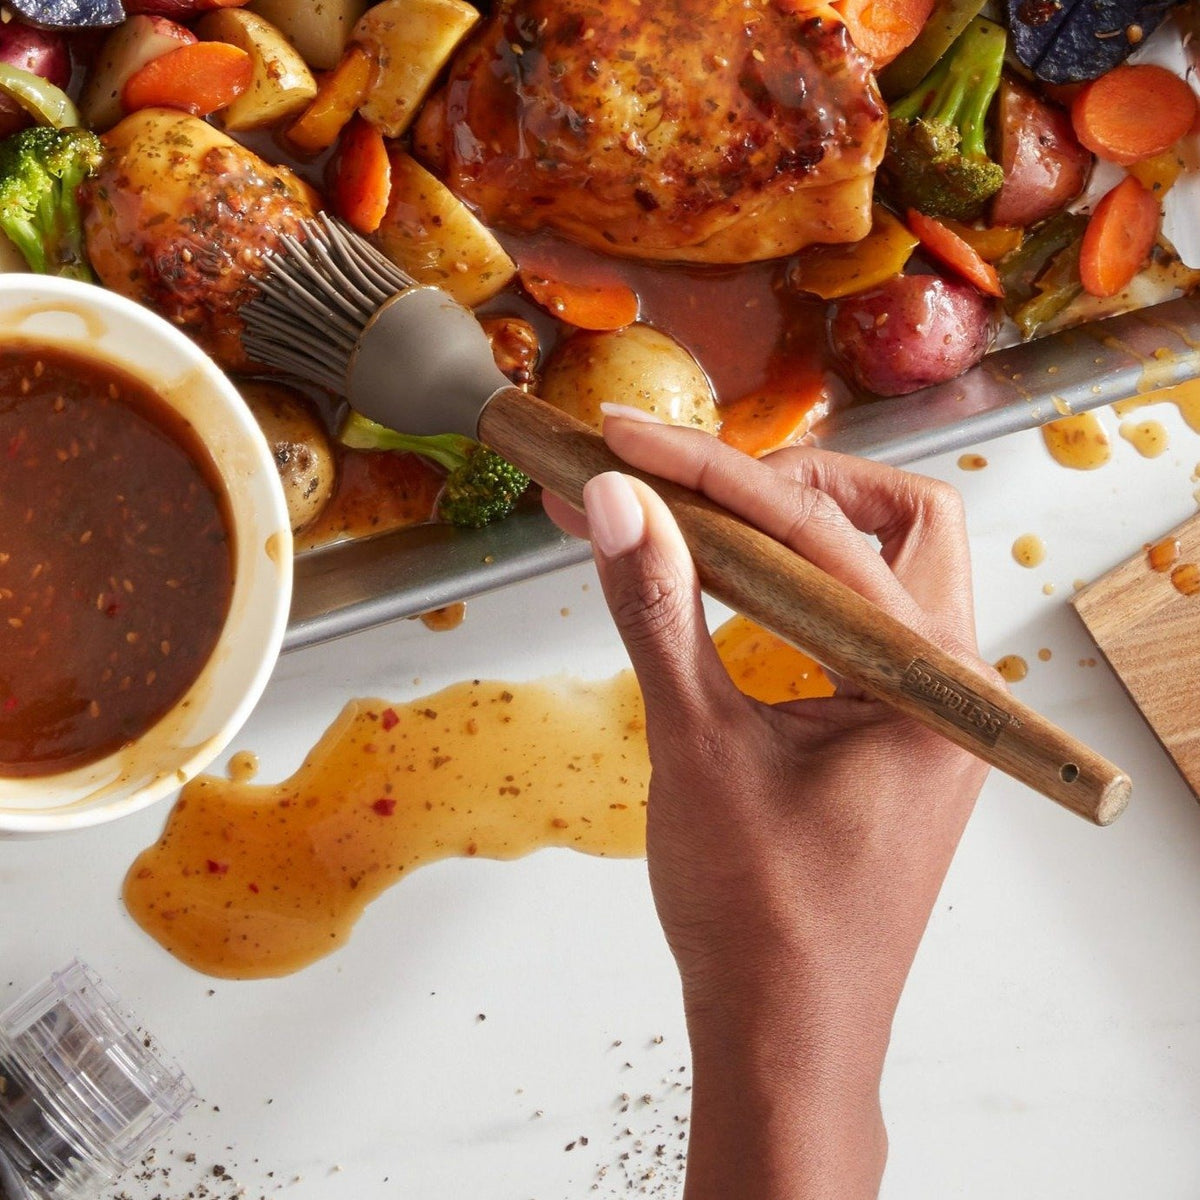 Lifestyle photo, womans&#39;s hands using silicone basting brush spreading a sweet chili marinade over a baking tray of chicken separates and chopped veggies.